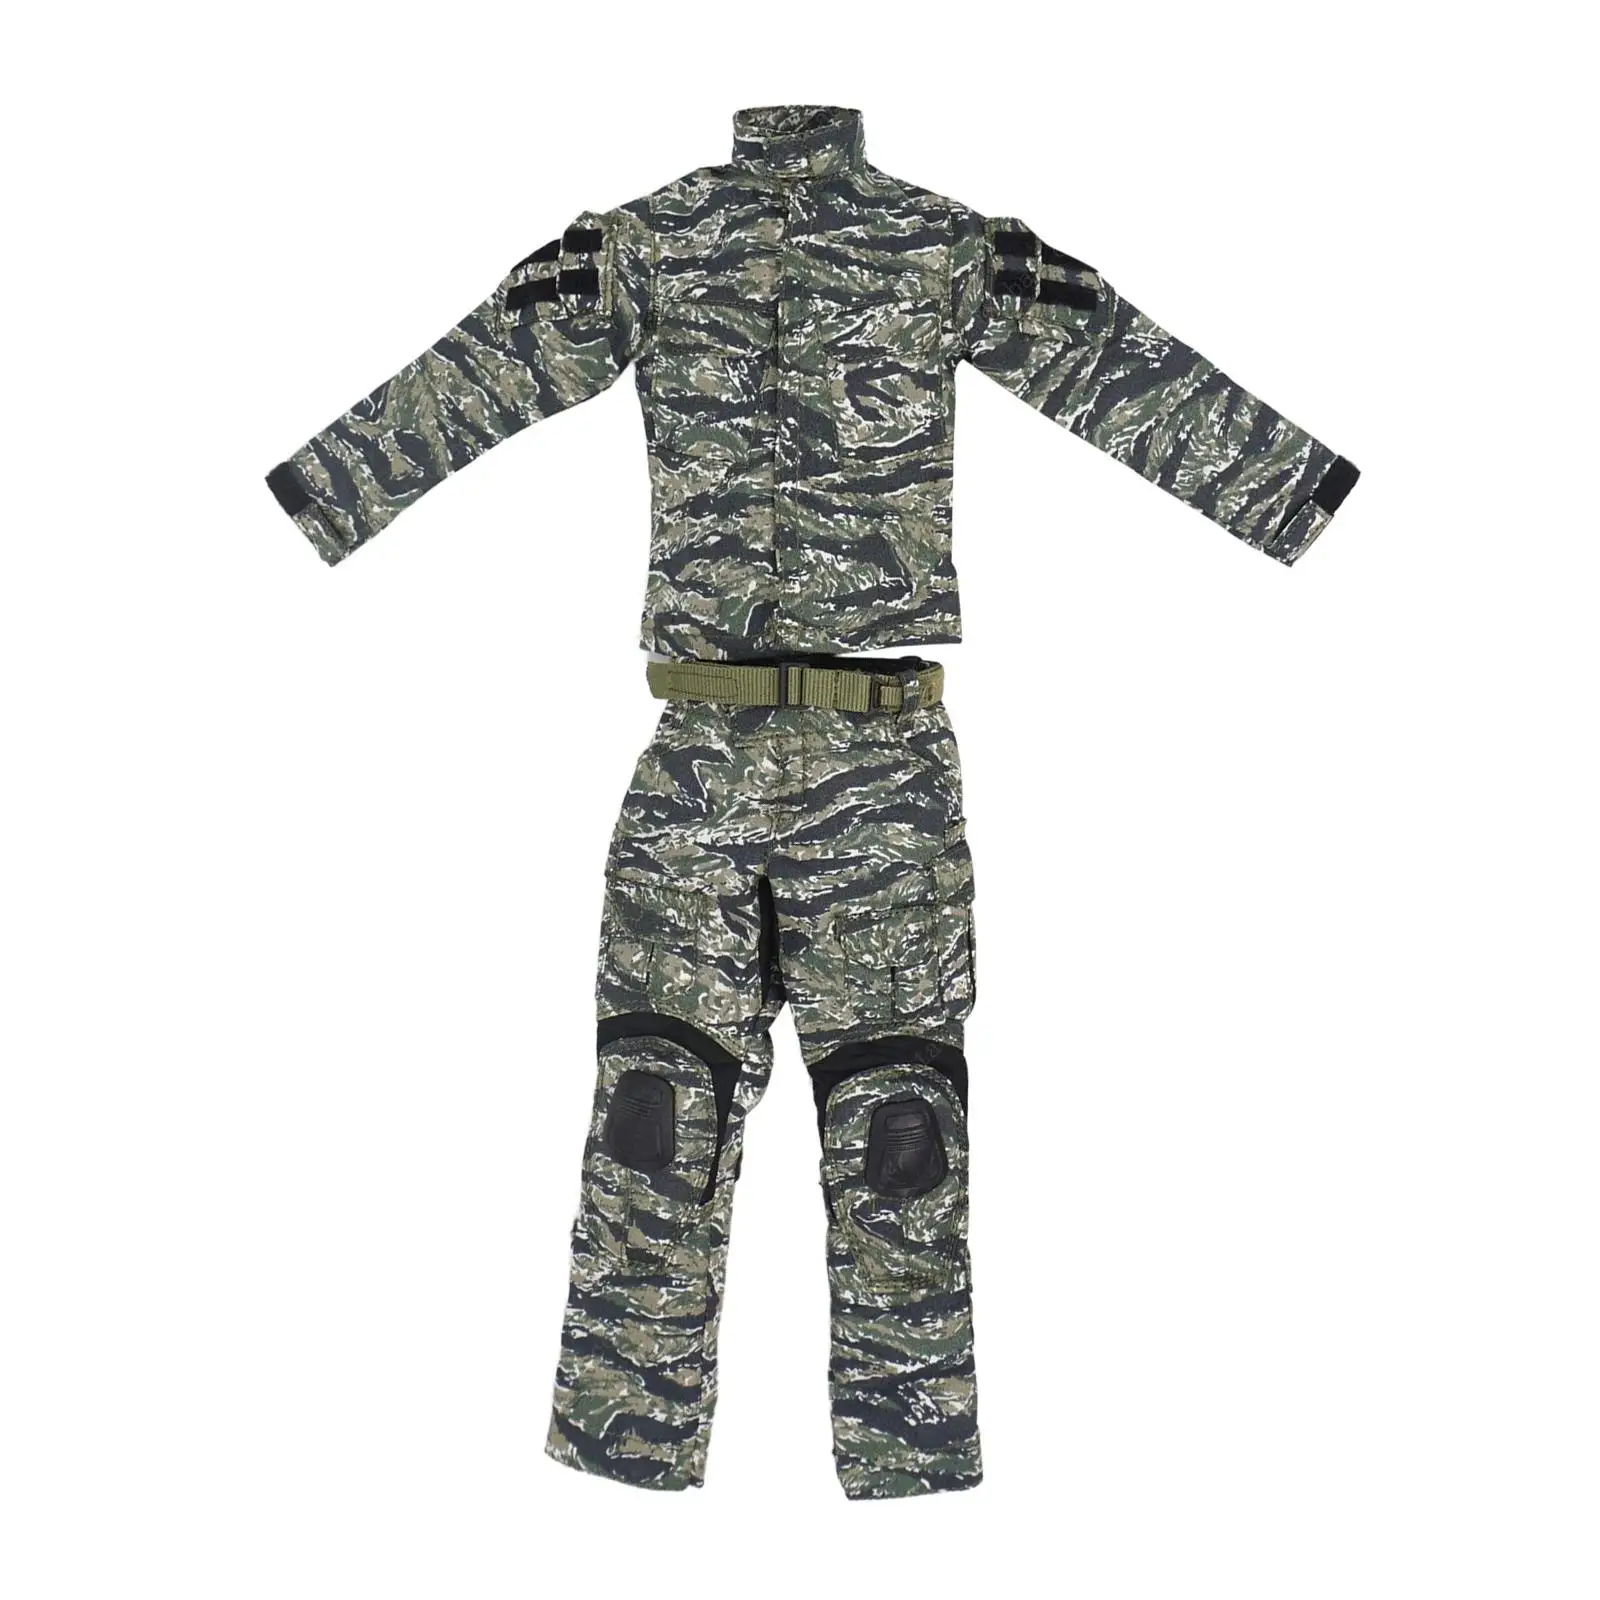 1/6 Scale Male Figure Doll Clothes Outfit, 12inch Action Figures Training Uniform, Outdoor Training Soldier